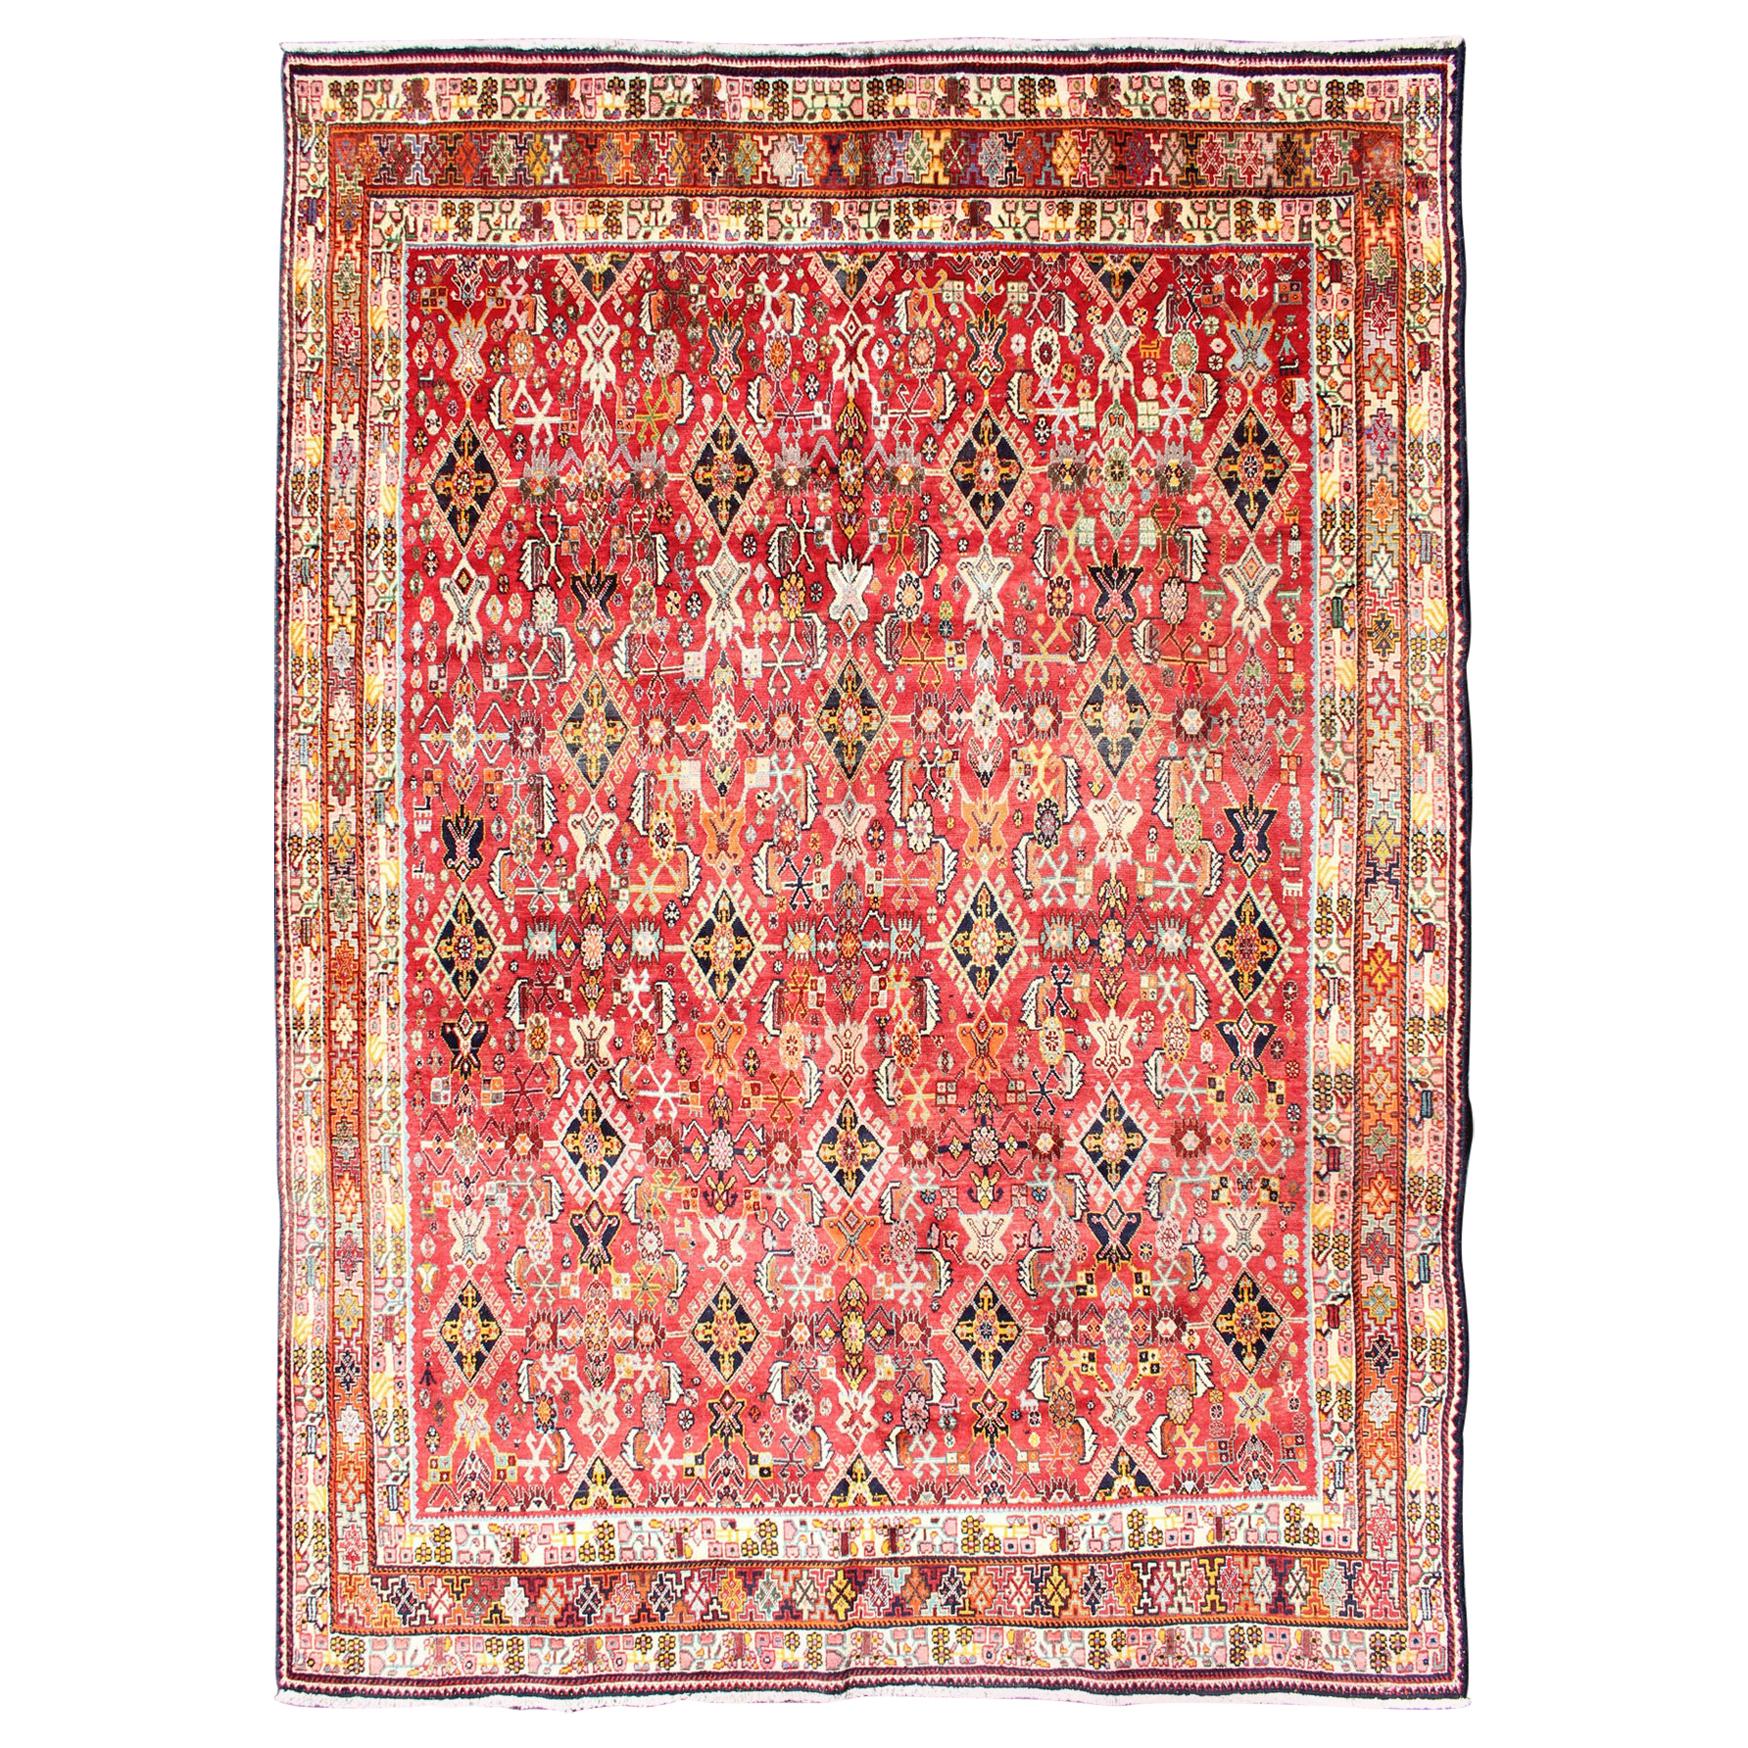 Vintage Shiraz/Qashgai Persian Rug in All-Over Design in Red and Multi-Colors